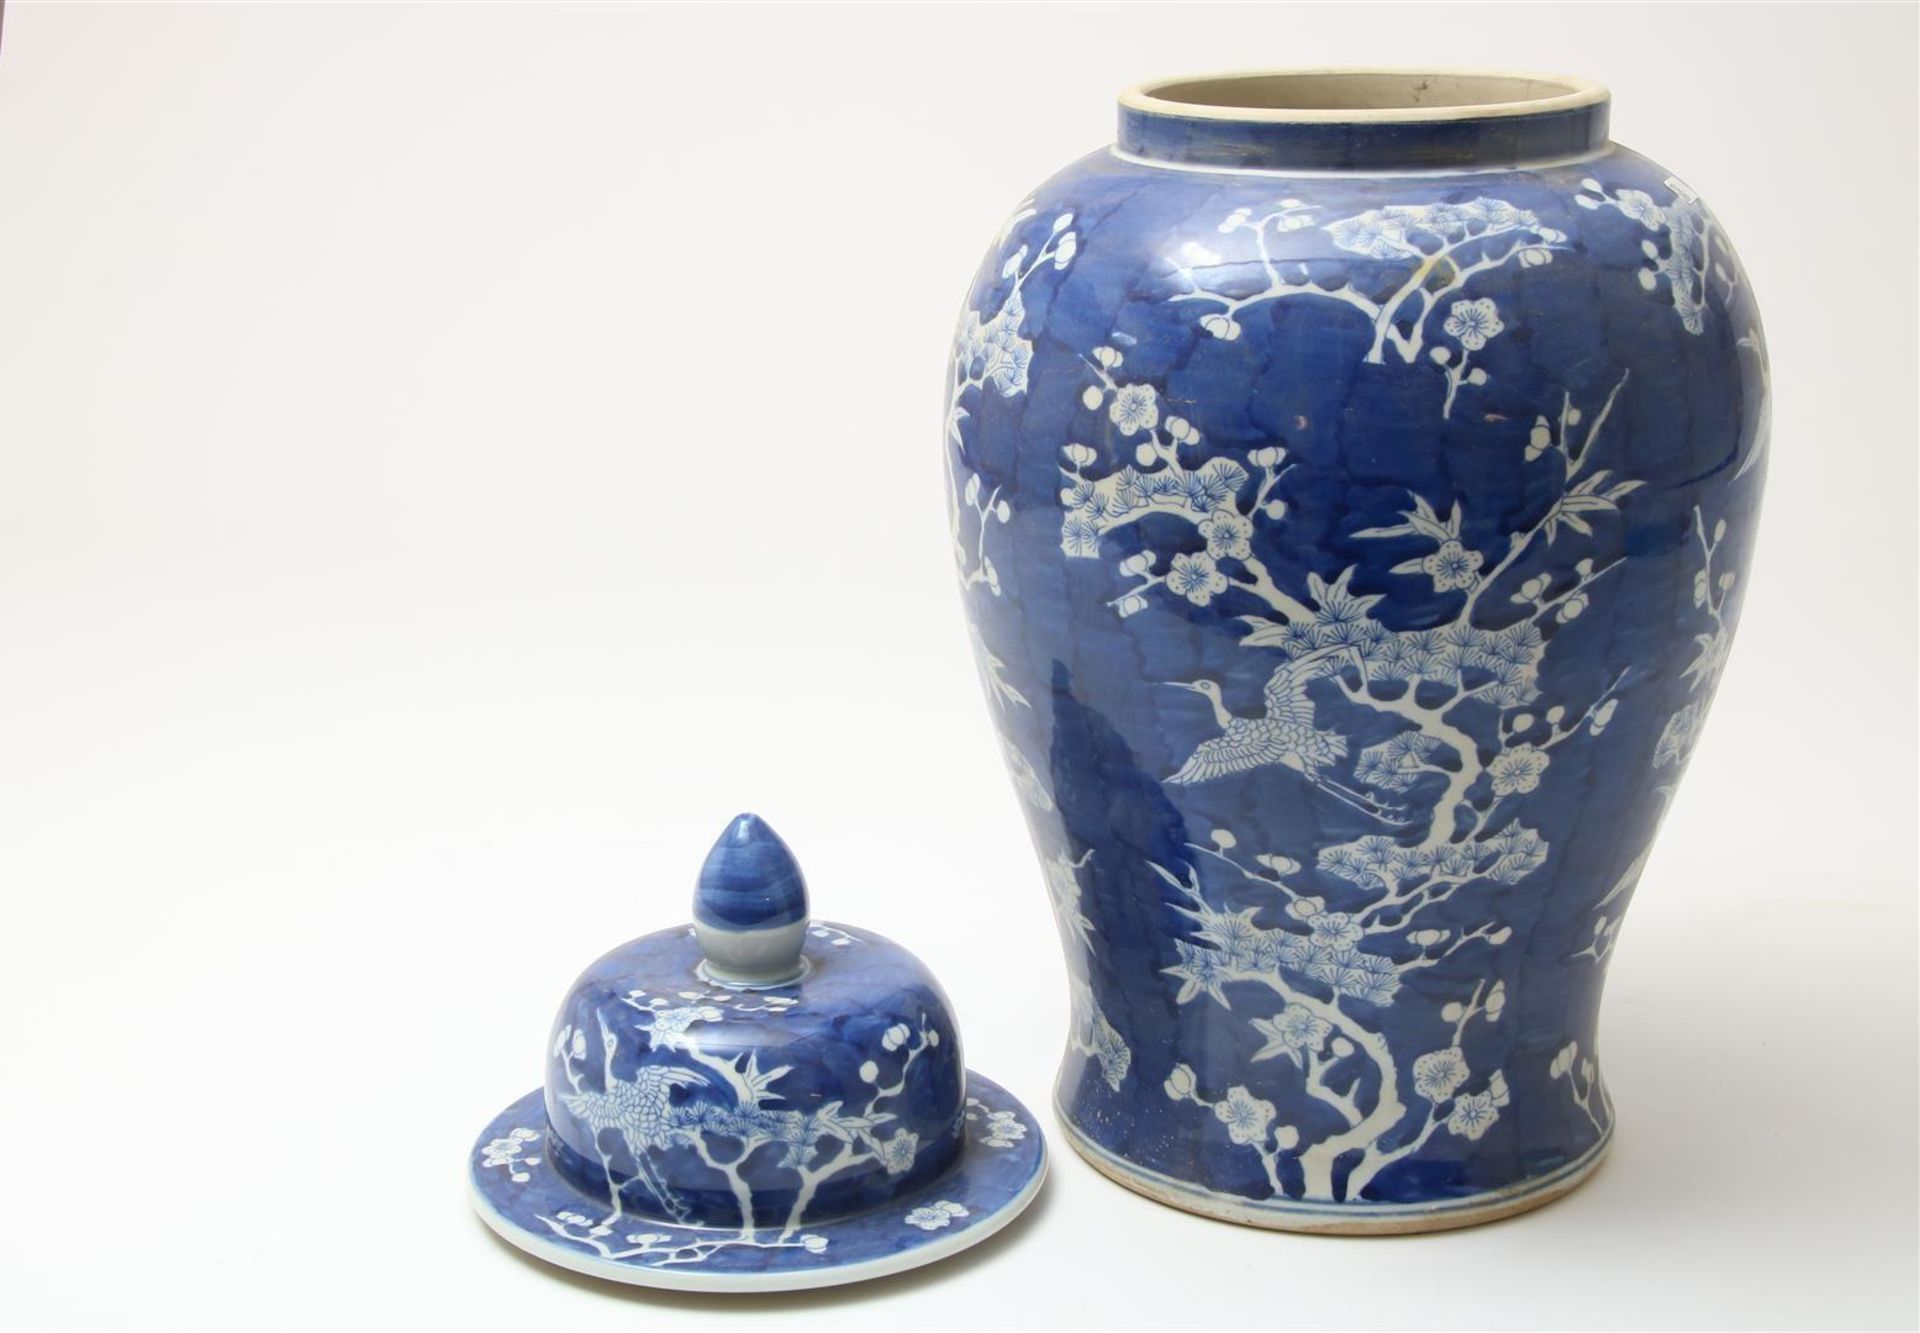 Blue and white porcelain lidded vase decorated with blossom branches and cranes, China 20th century, - Image 2 of 5